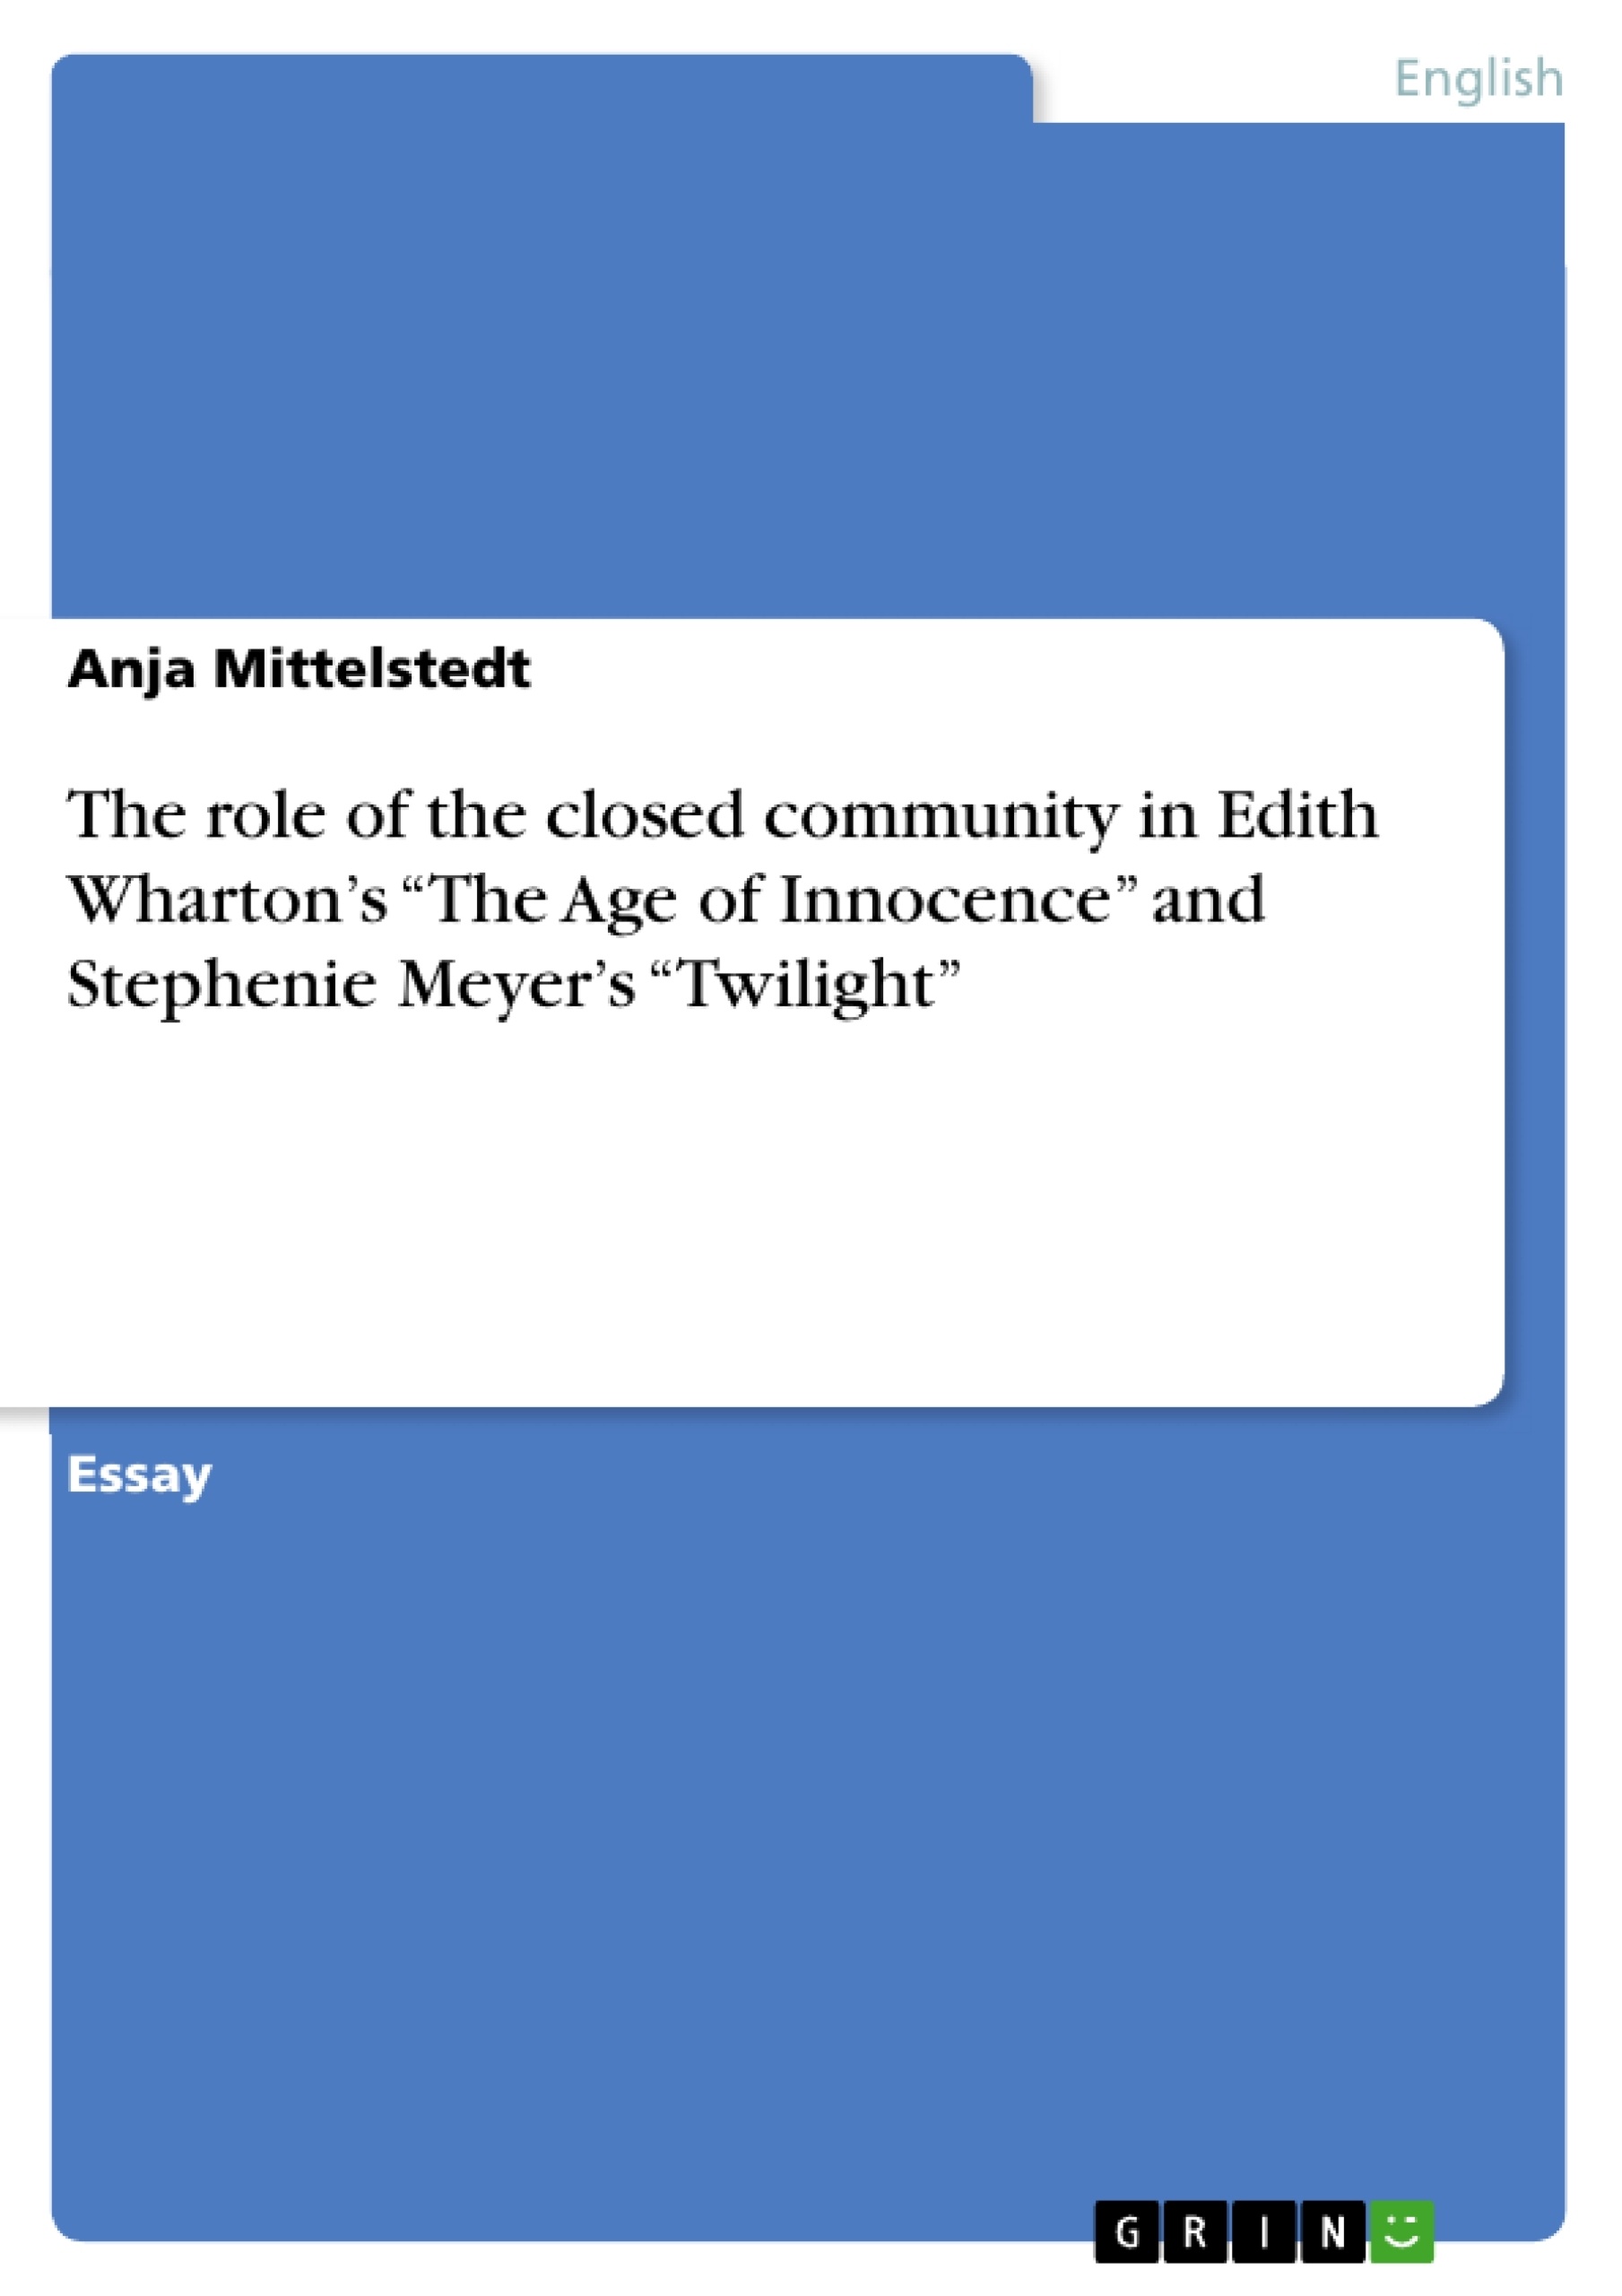 Title: The role of the closed community in Edith Wharton’s “The Age of Innocence” and Stephenie Meyer’s “Twilight”